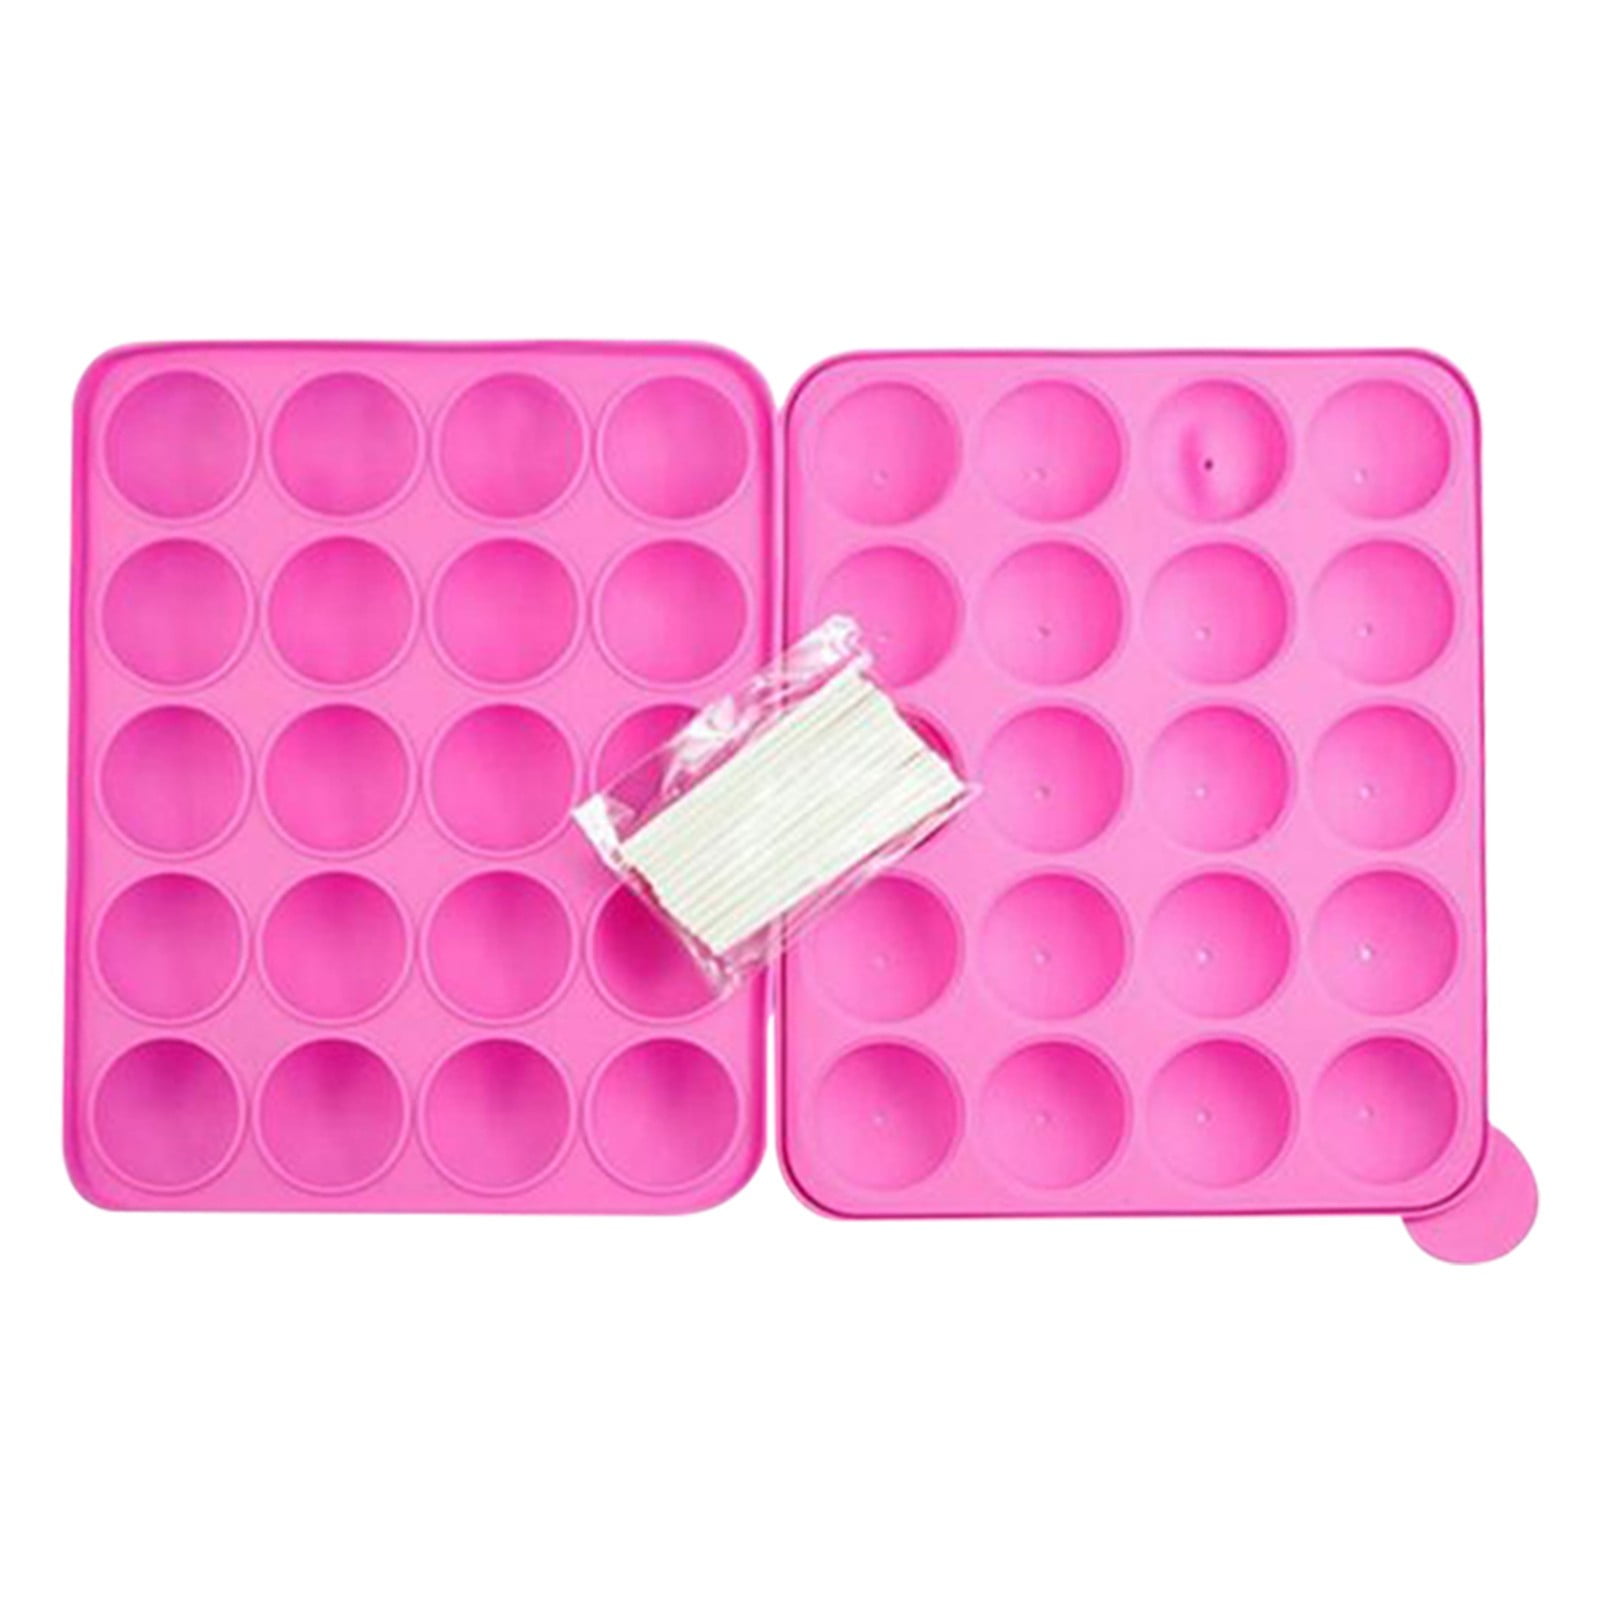 20-Hole Lollipop Silicone Pop Mold Cake Mold Chocolate Mould Tray Food-Grade